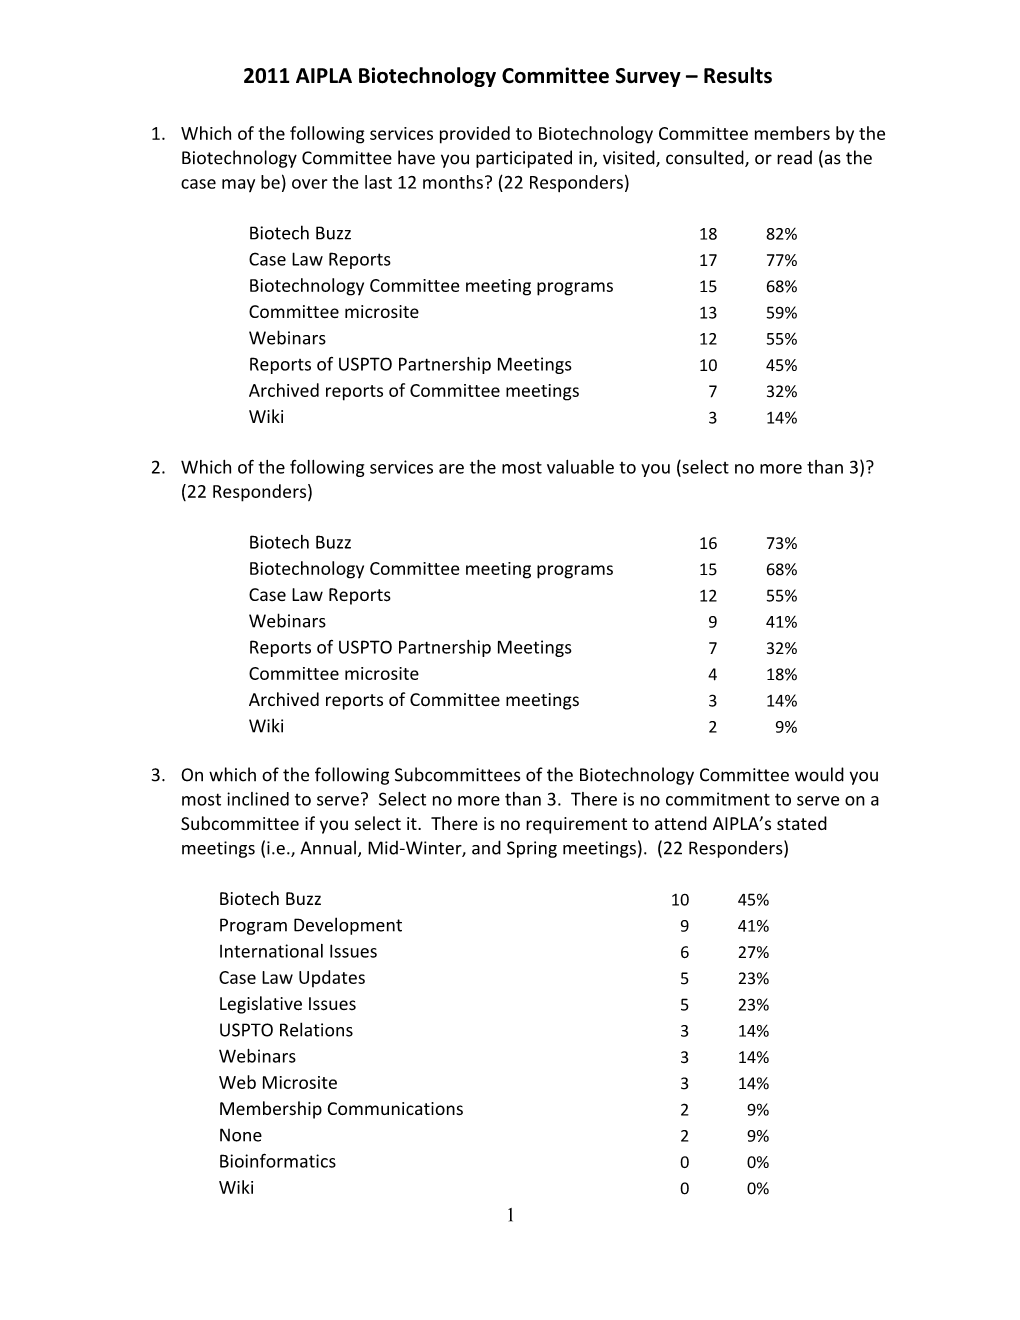 2011 AIPLA Biotechnology Committee Survey Results